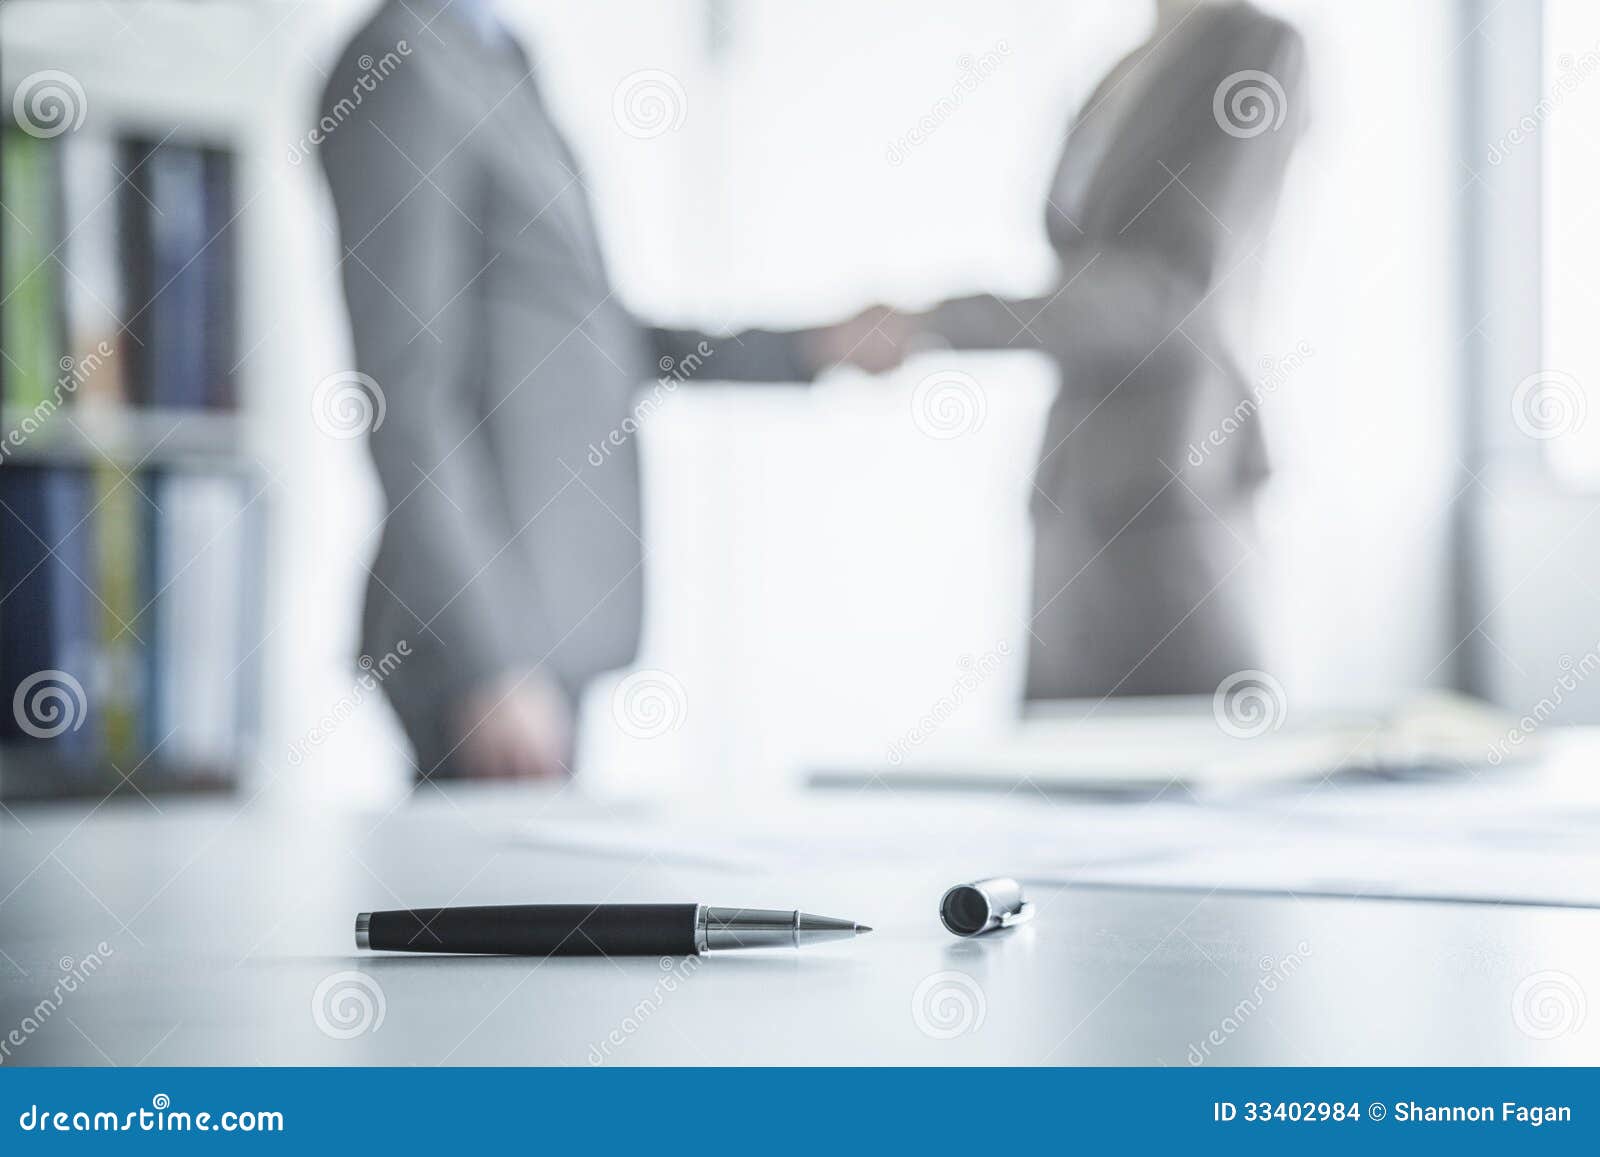 two business people shaking hands in the background, pen lying on the table in the foreground